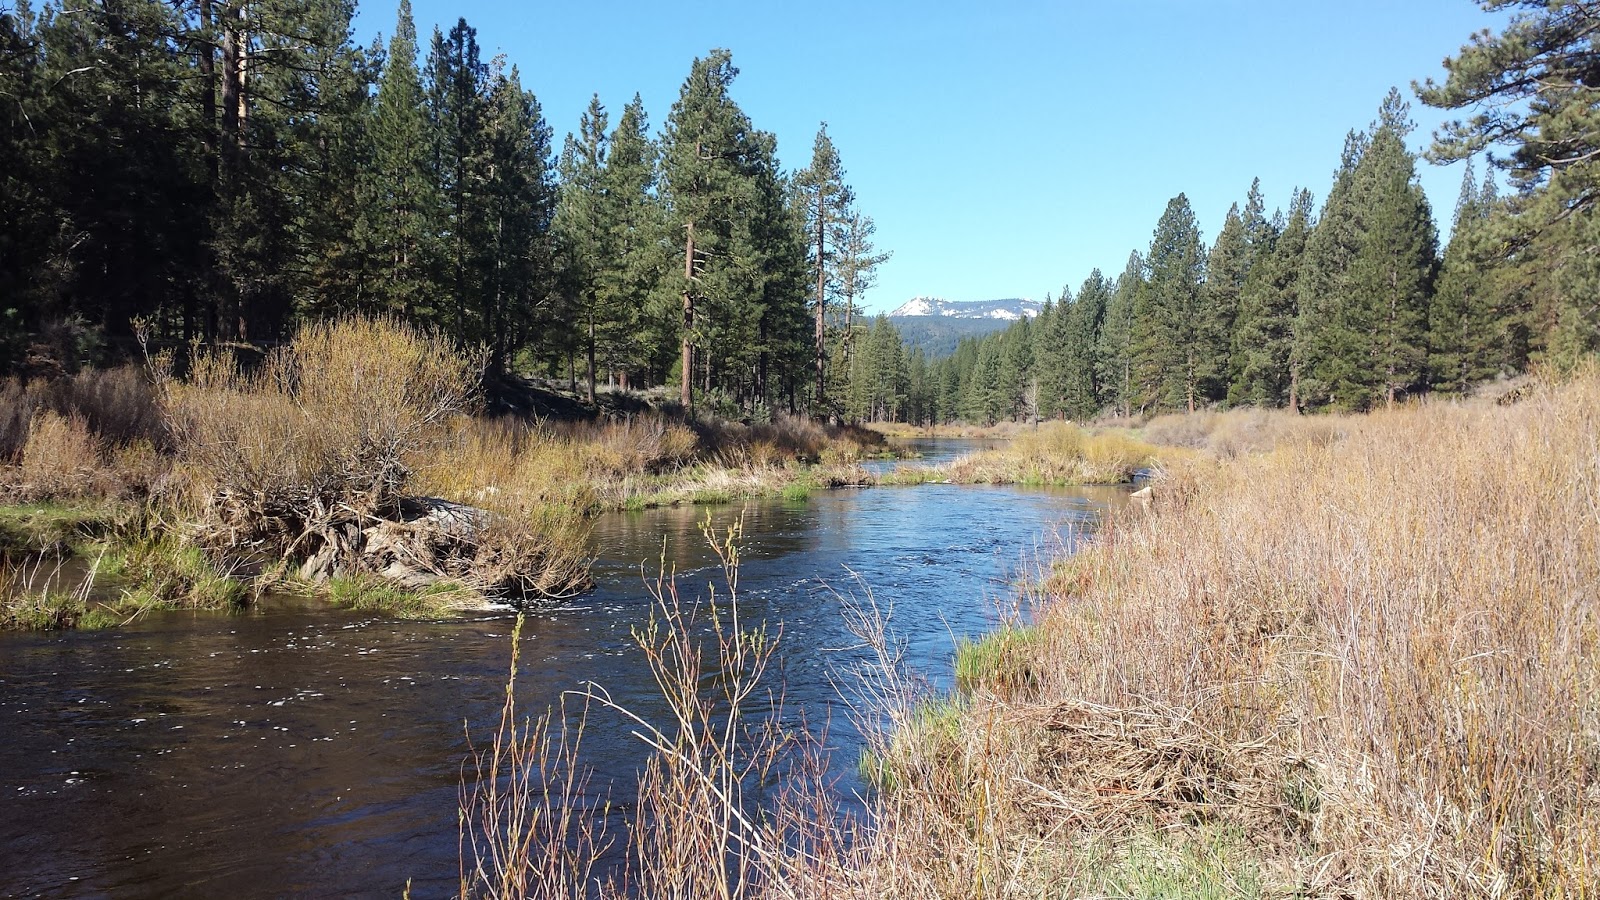 Opened Early – The Middle Fork of the Feather River